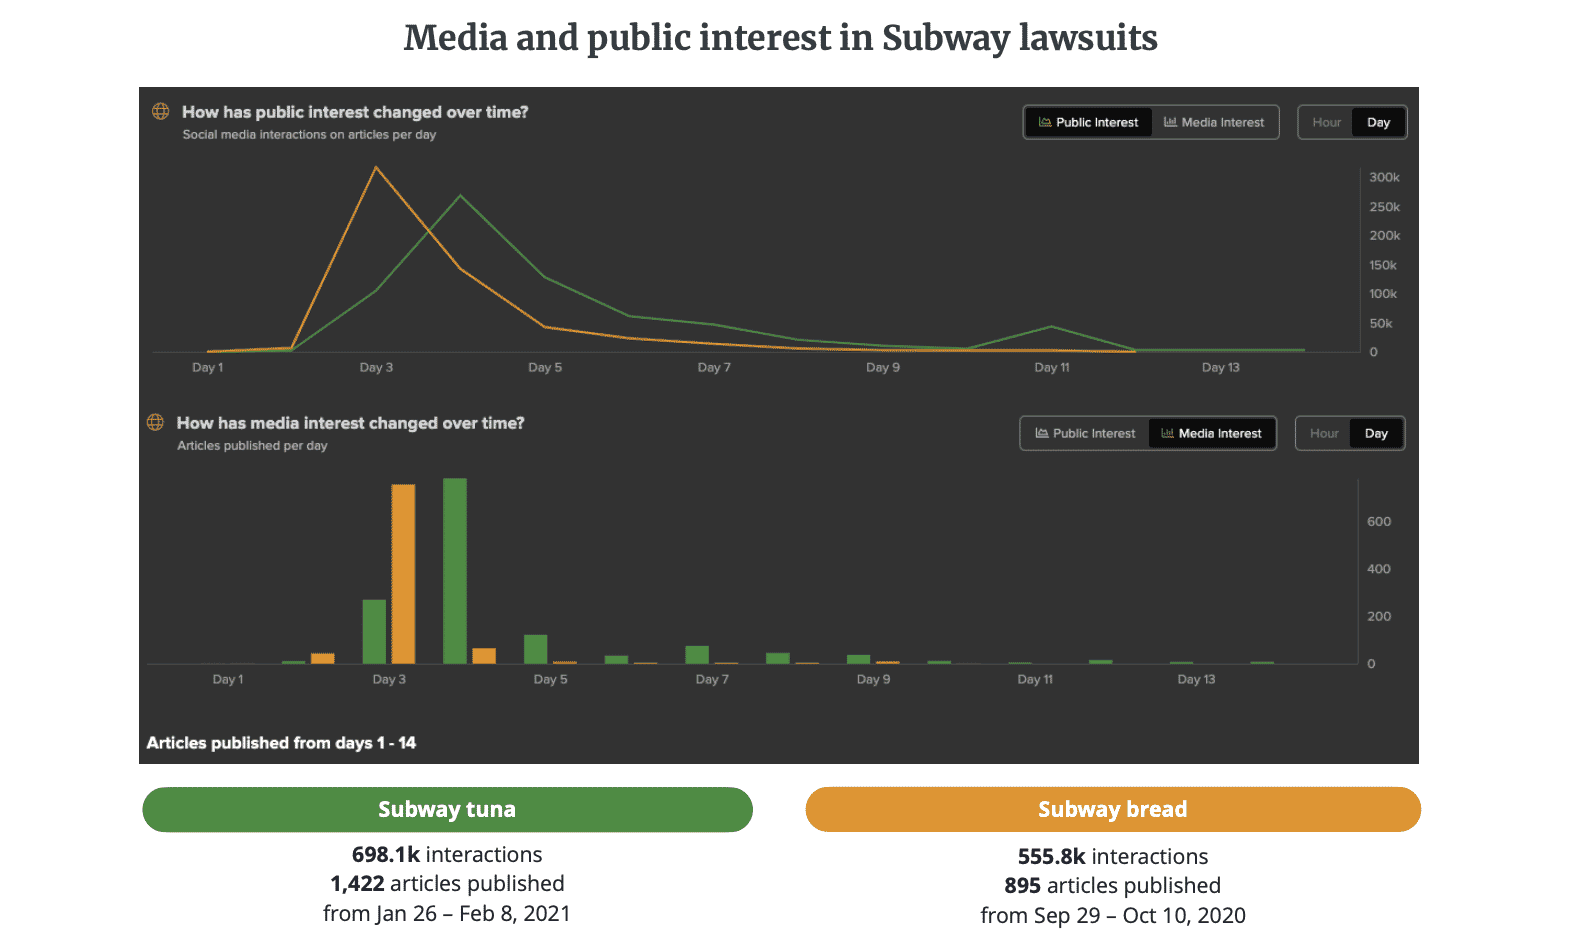 Chart comparing the media and public interest in the bread lawsuit vs. the tuna lawsuit